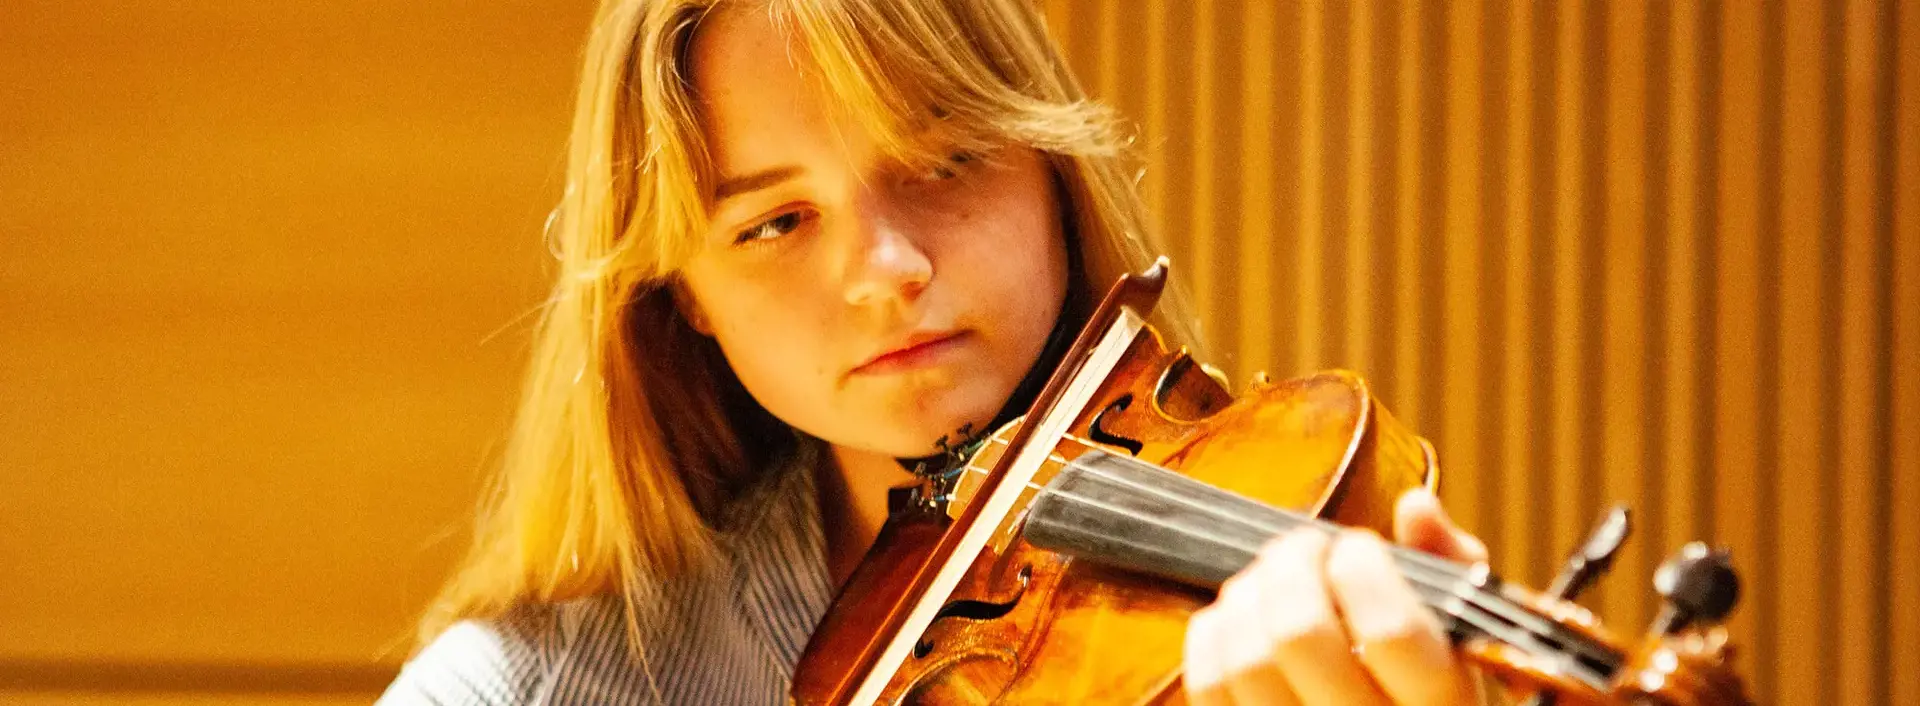 Kent College Canterbury Music Scholar Anna Playing Violin and Gains Oxford Offer